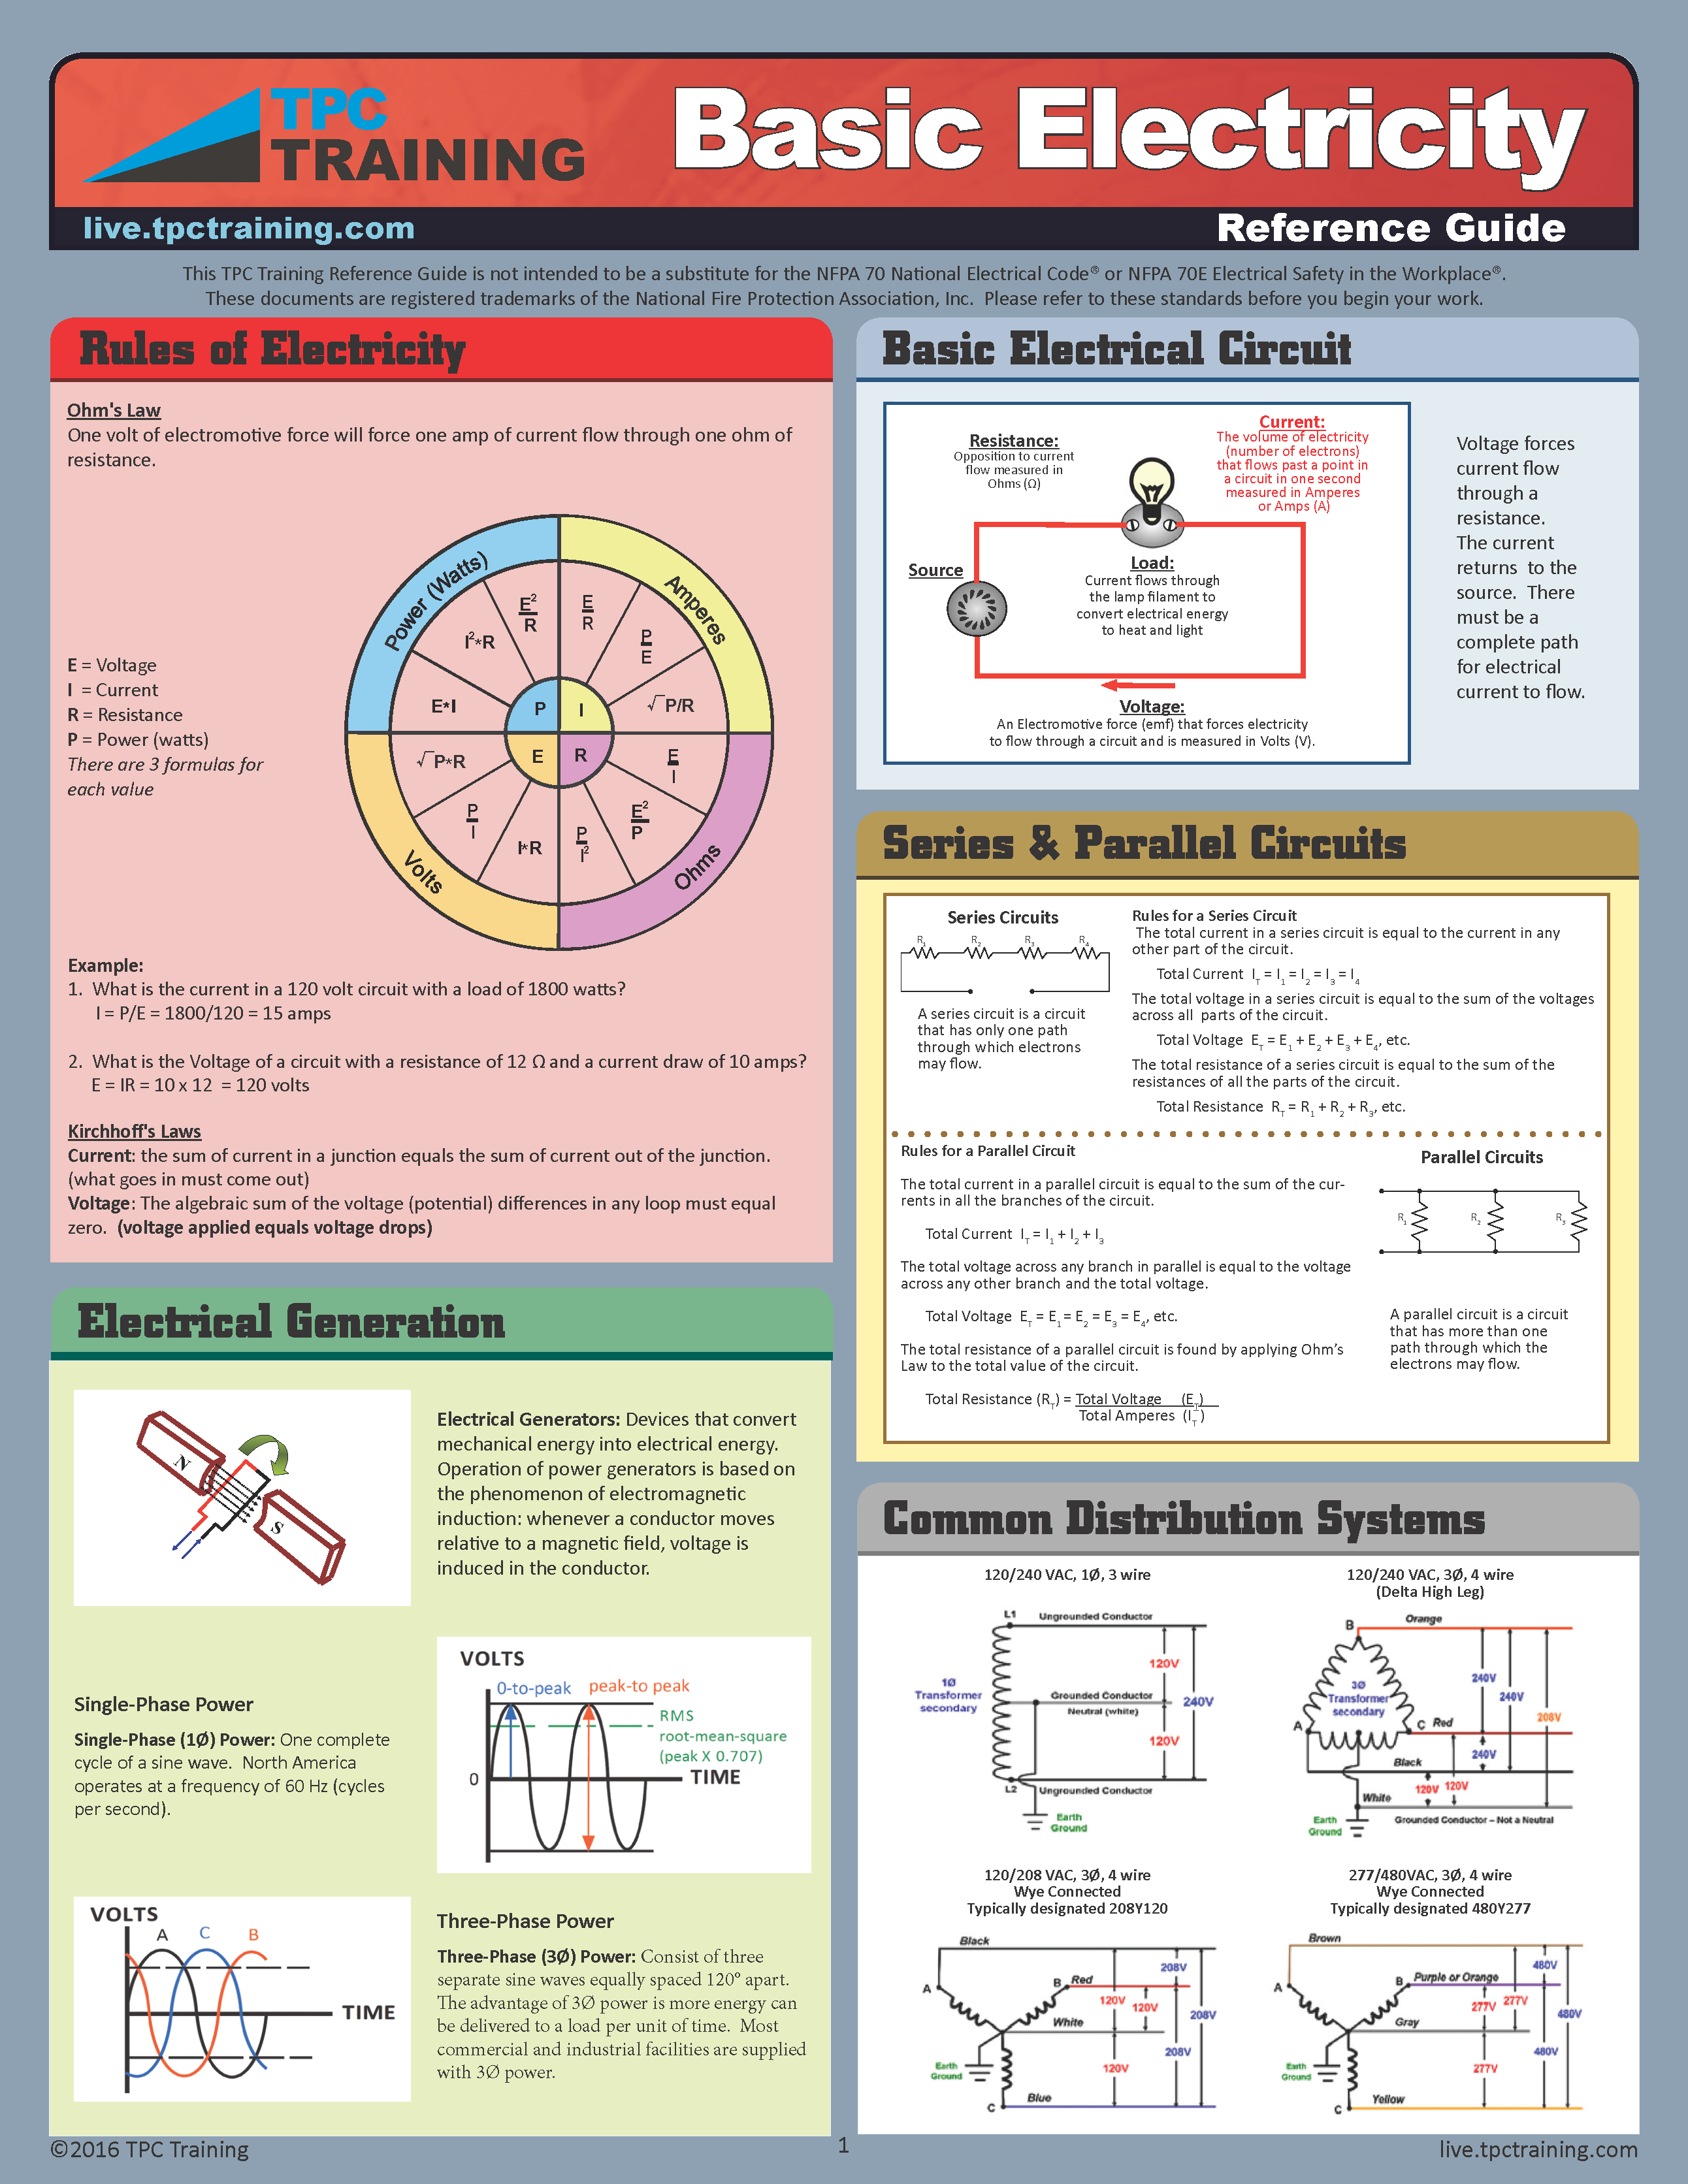 Basic Electricity Reference Guide